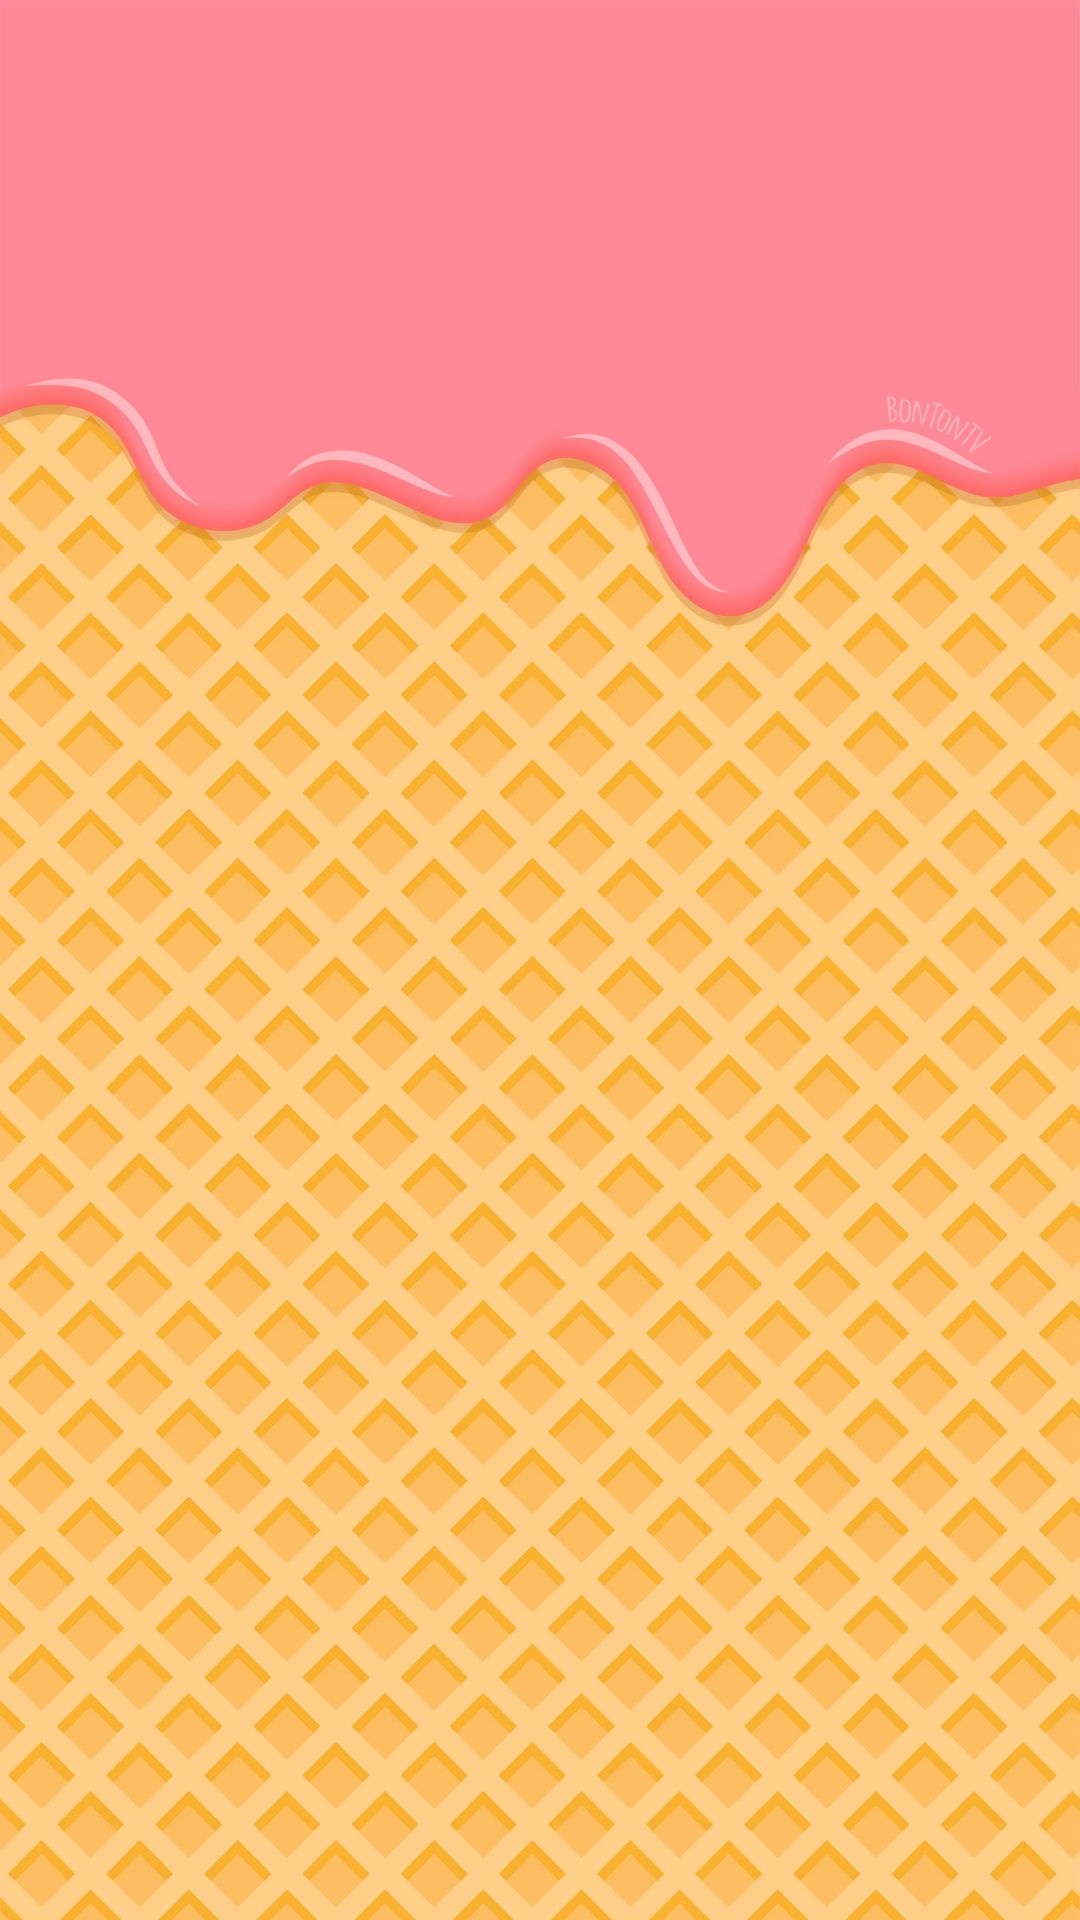 Waffle: Cooked until they become golden-brown in color, with a crispy outer texture and a soft interior. 1080x1920 Full HD Background.